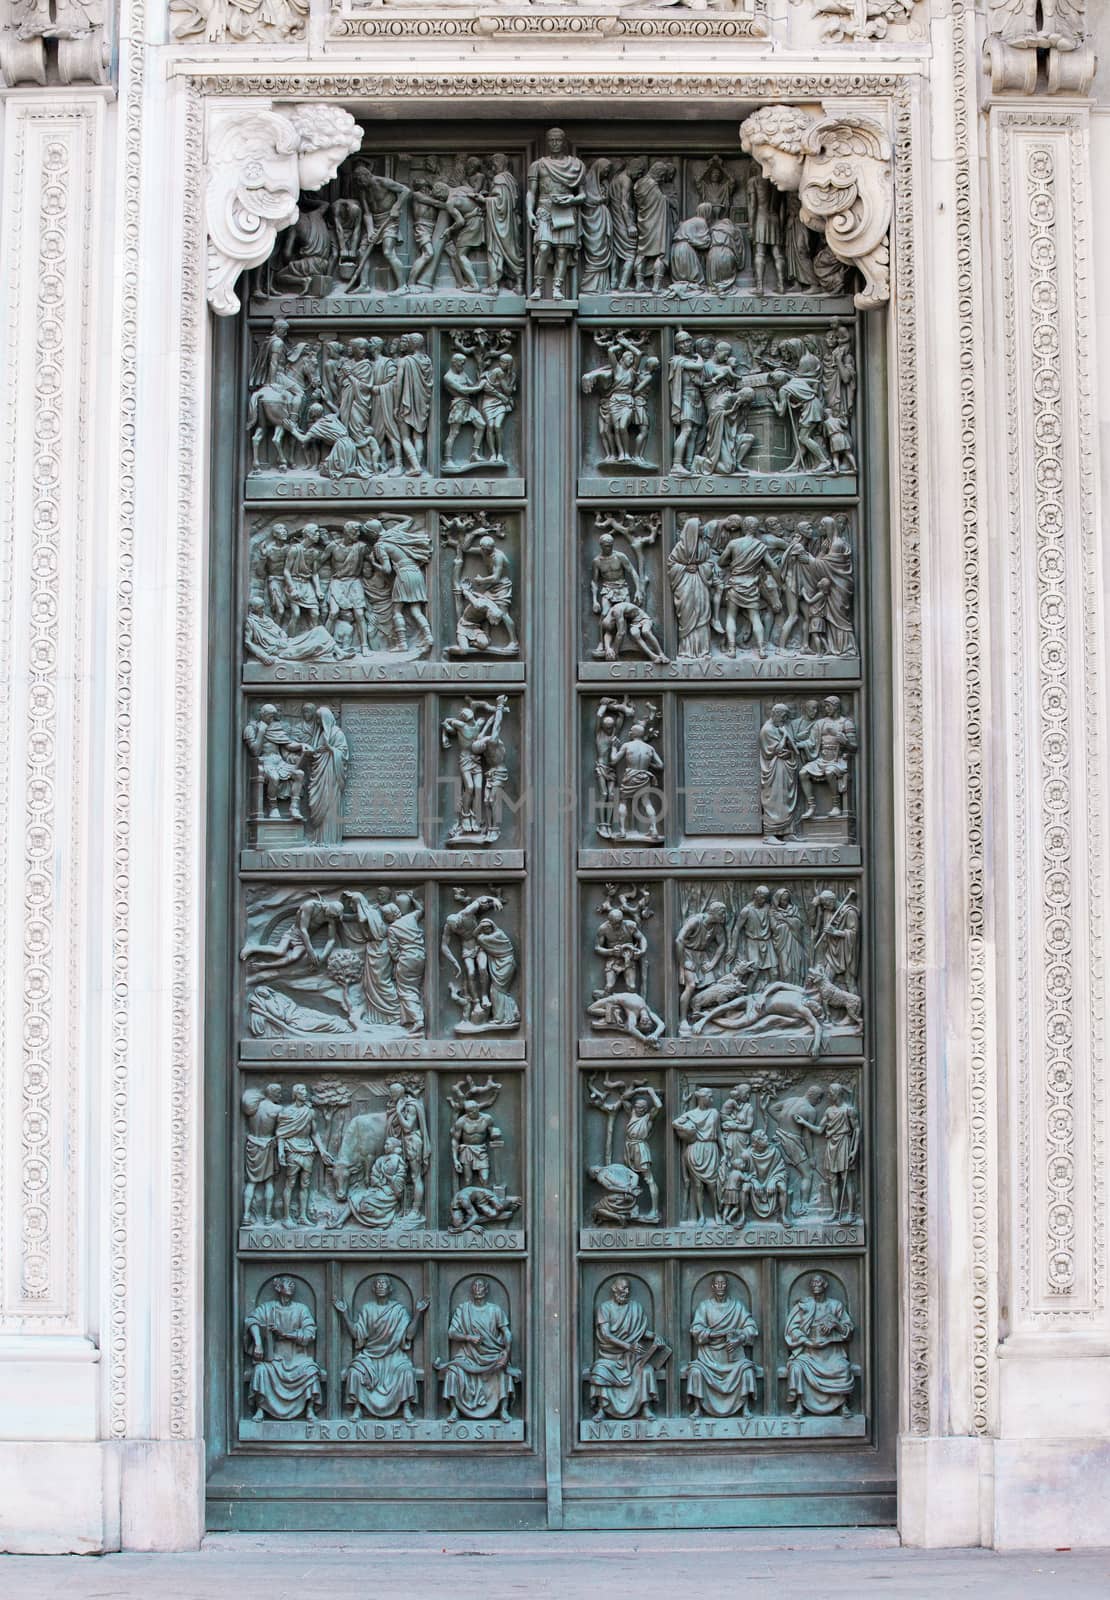 Decorated door of the Milan cathedral, Italy